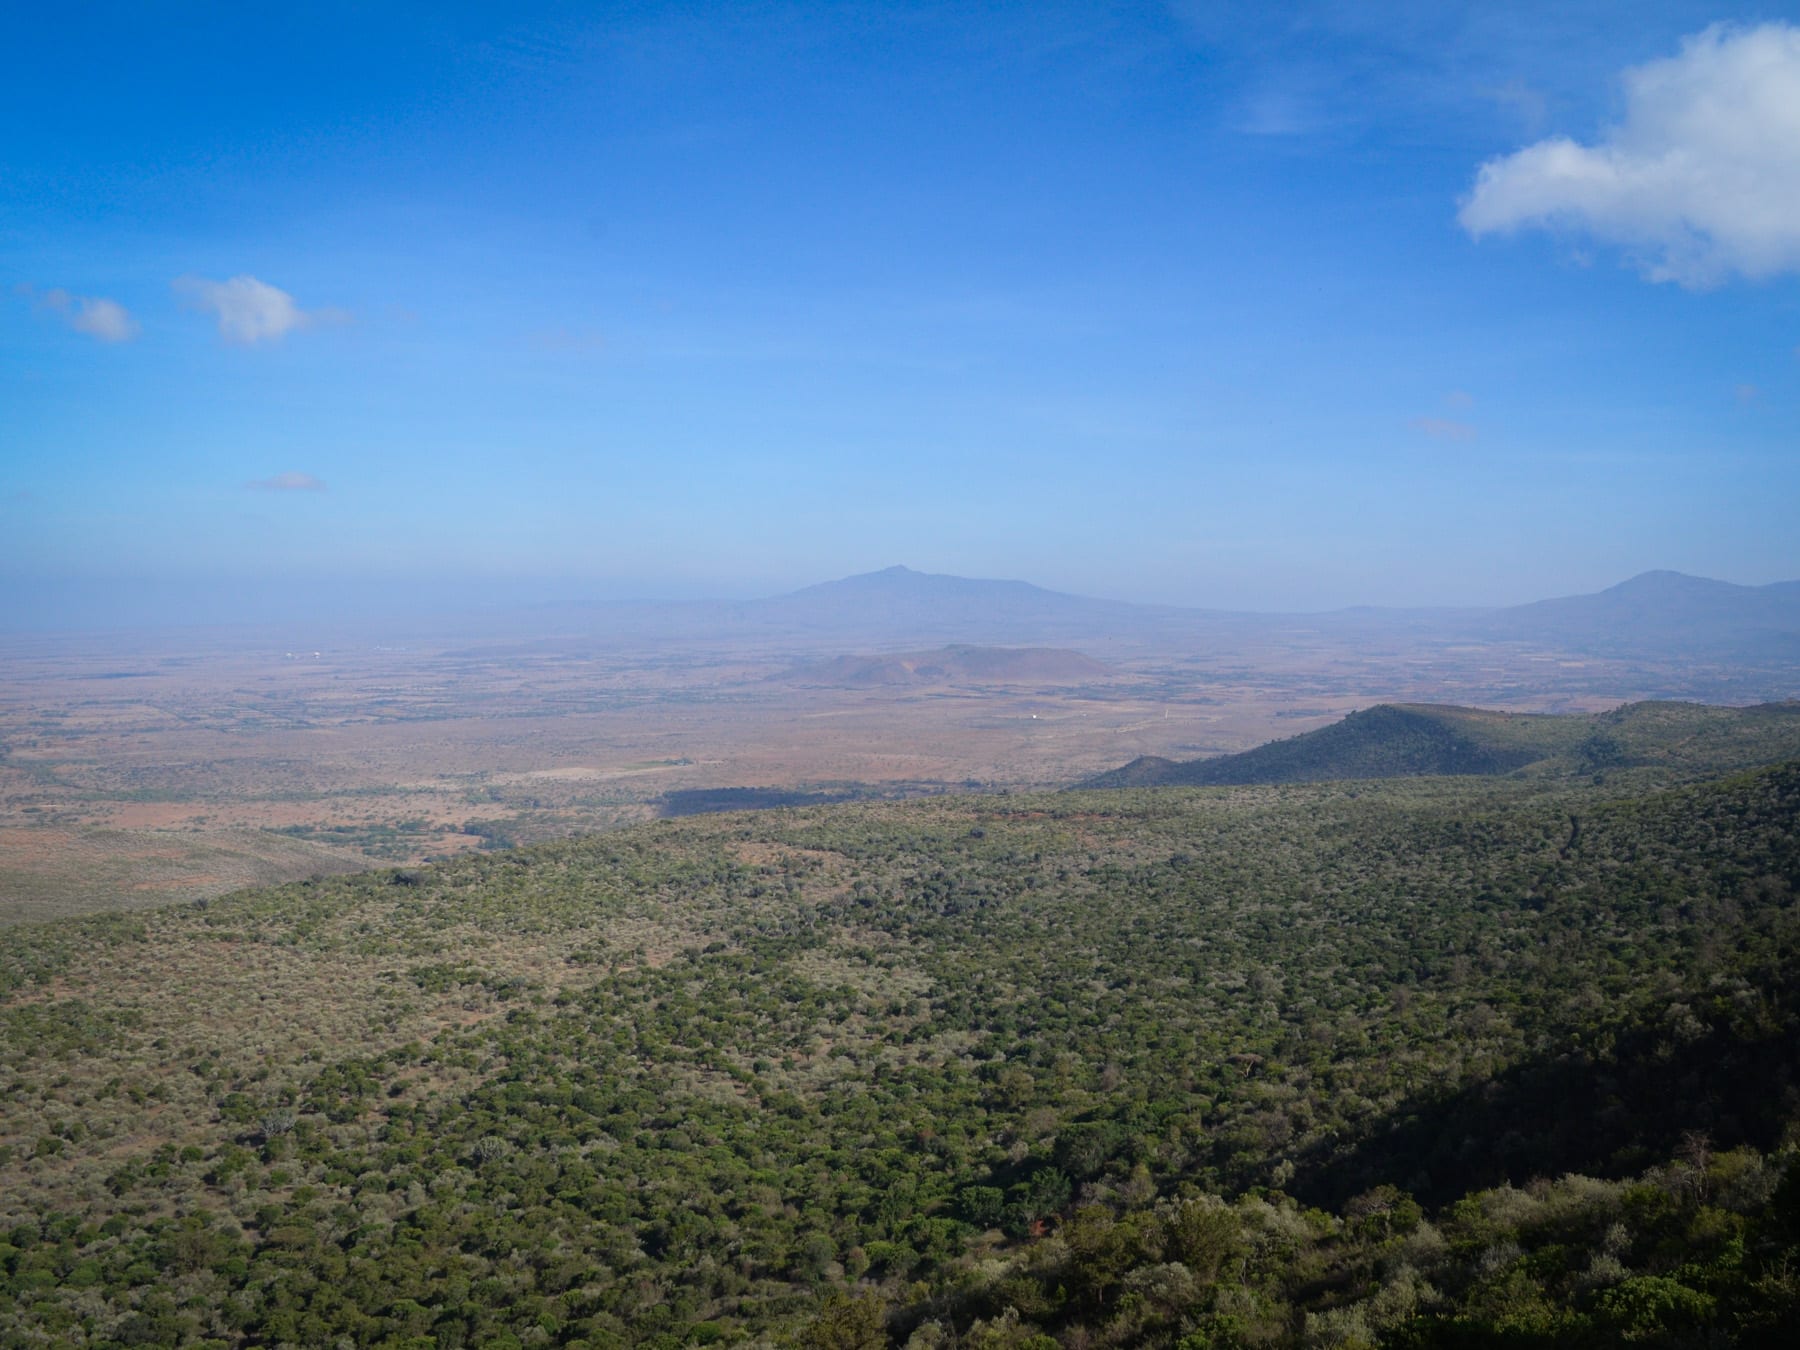 A view across the vast Great Rift Valley.